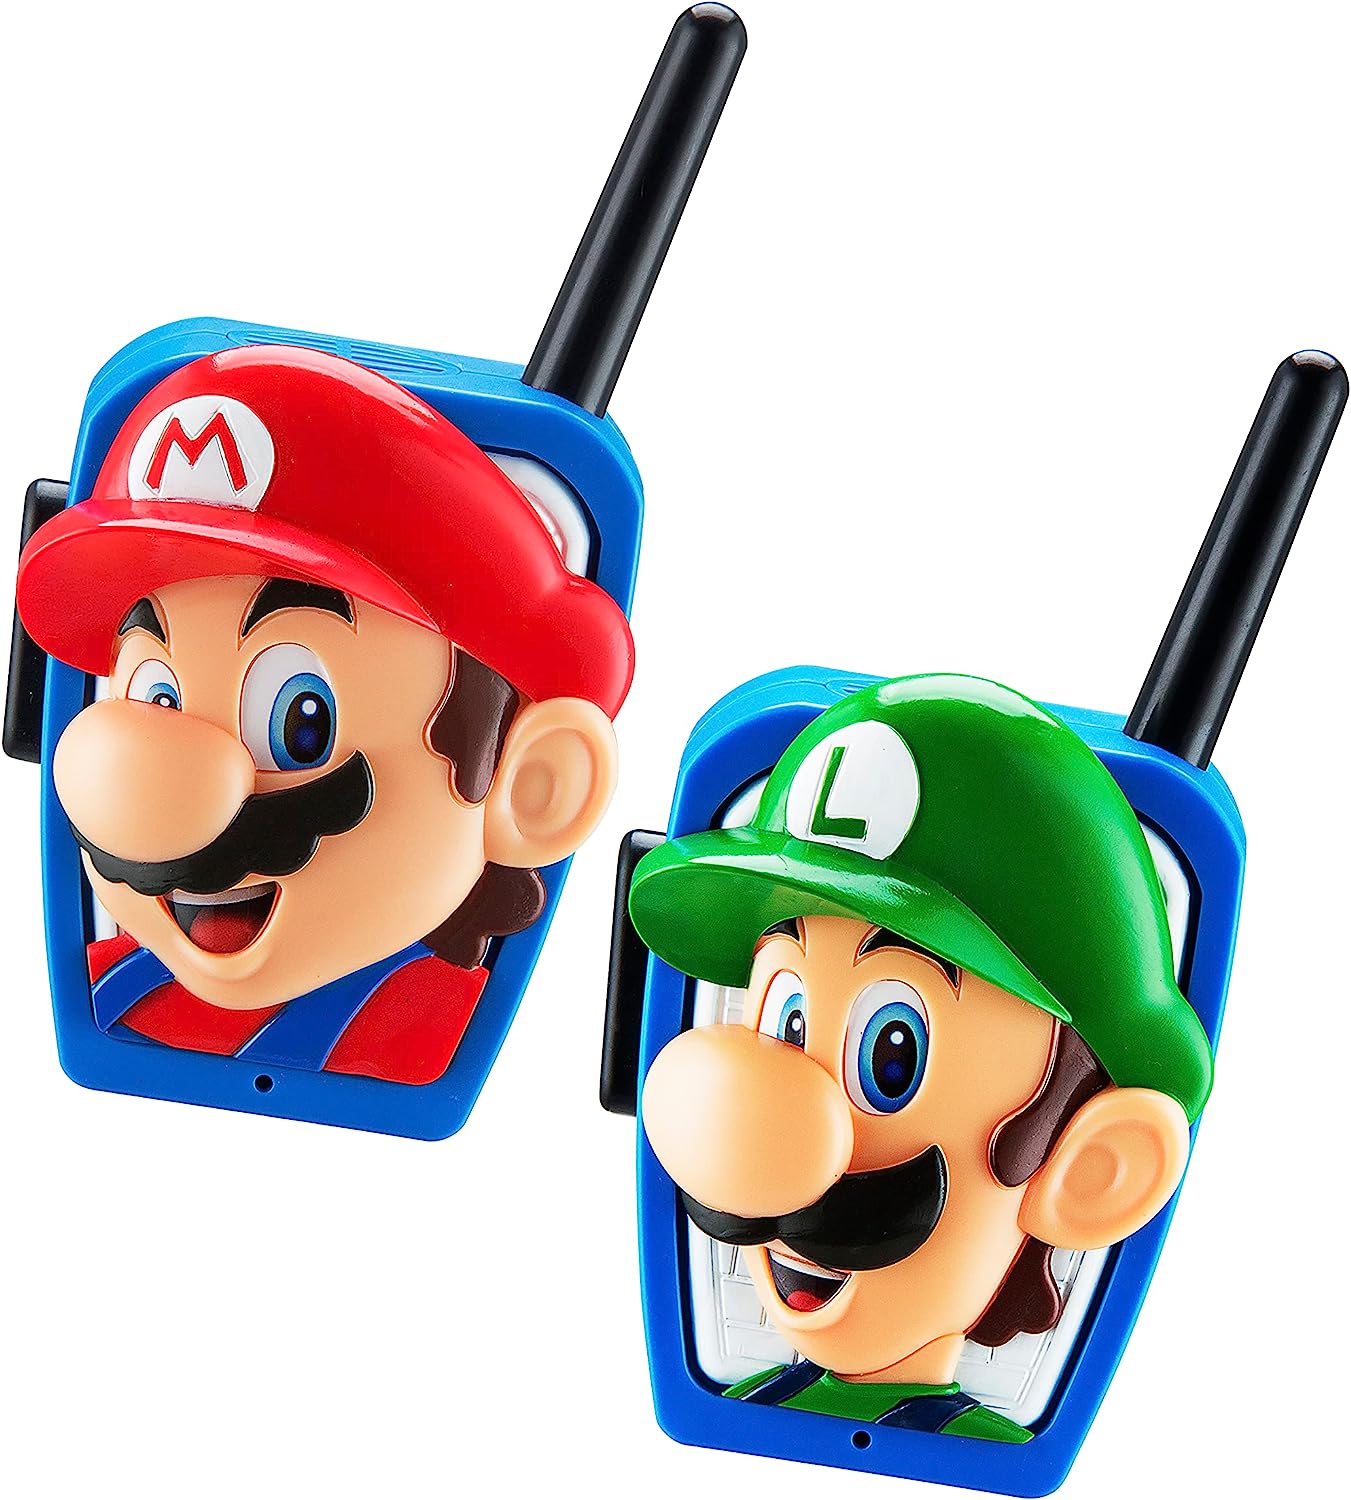 33 Best Super Mario Gifts That Will Surprise Them – Loveable